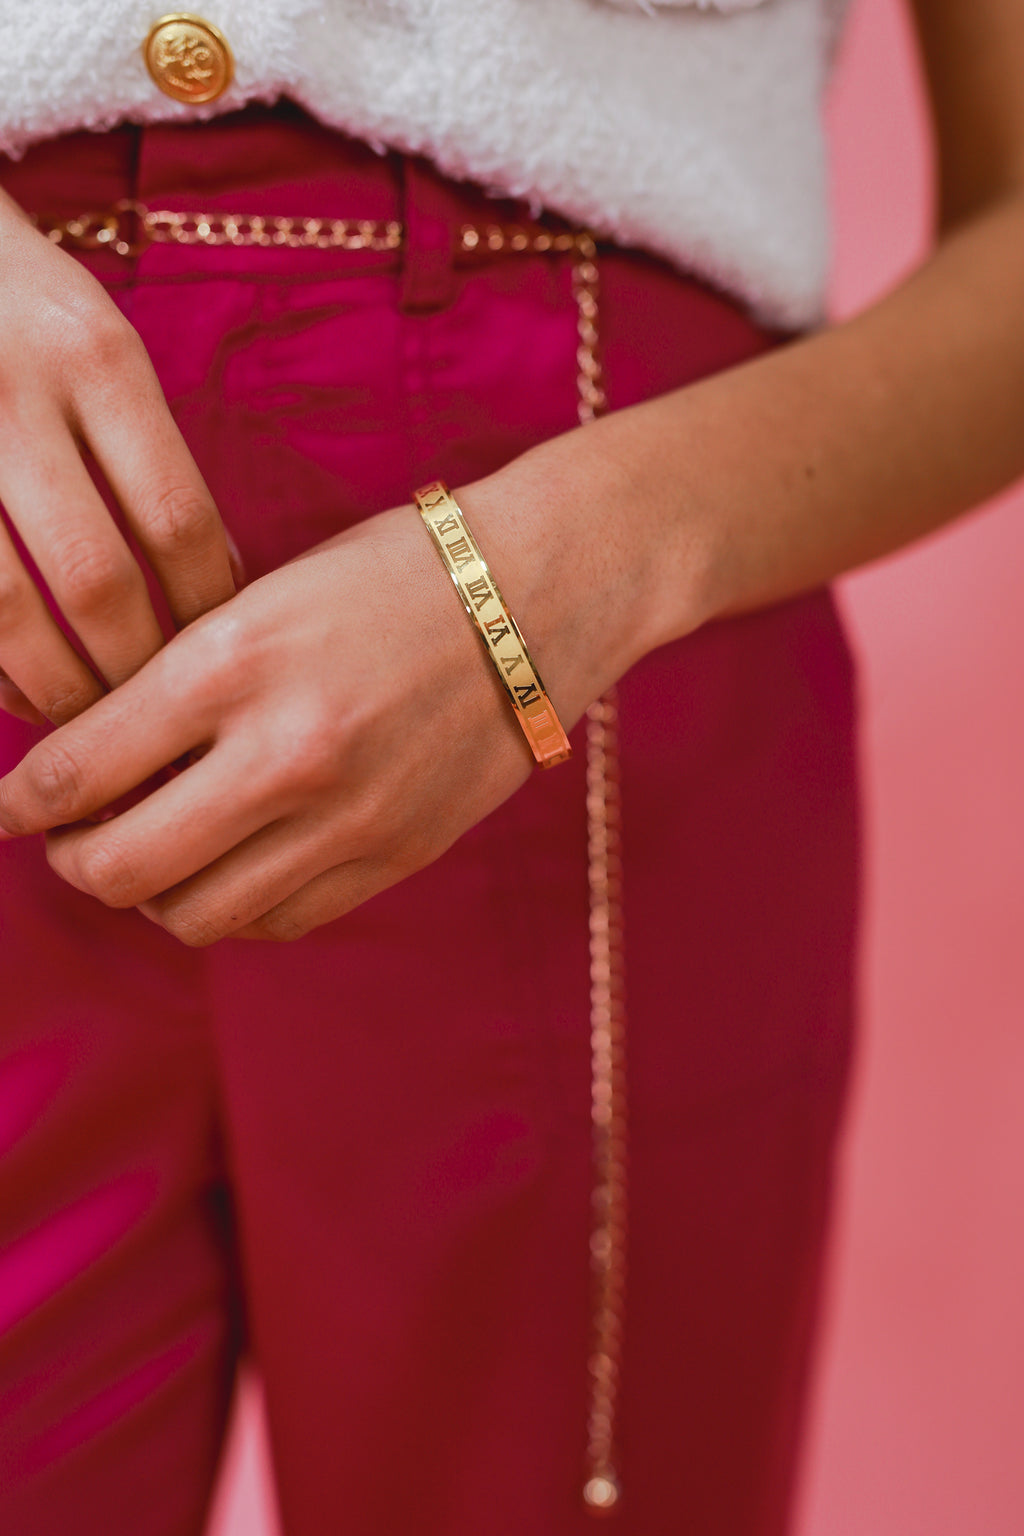 Only One Metal Roman Numeral Bracelet In Gold